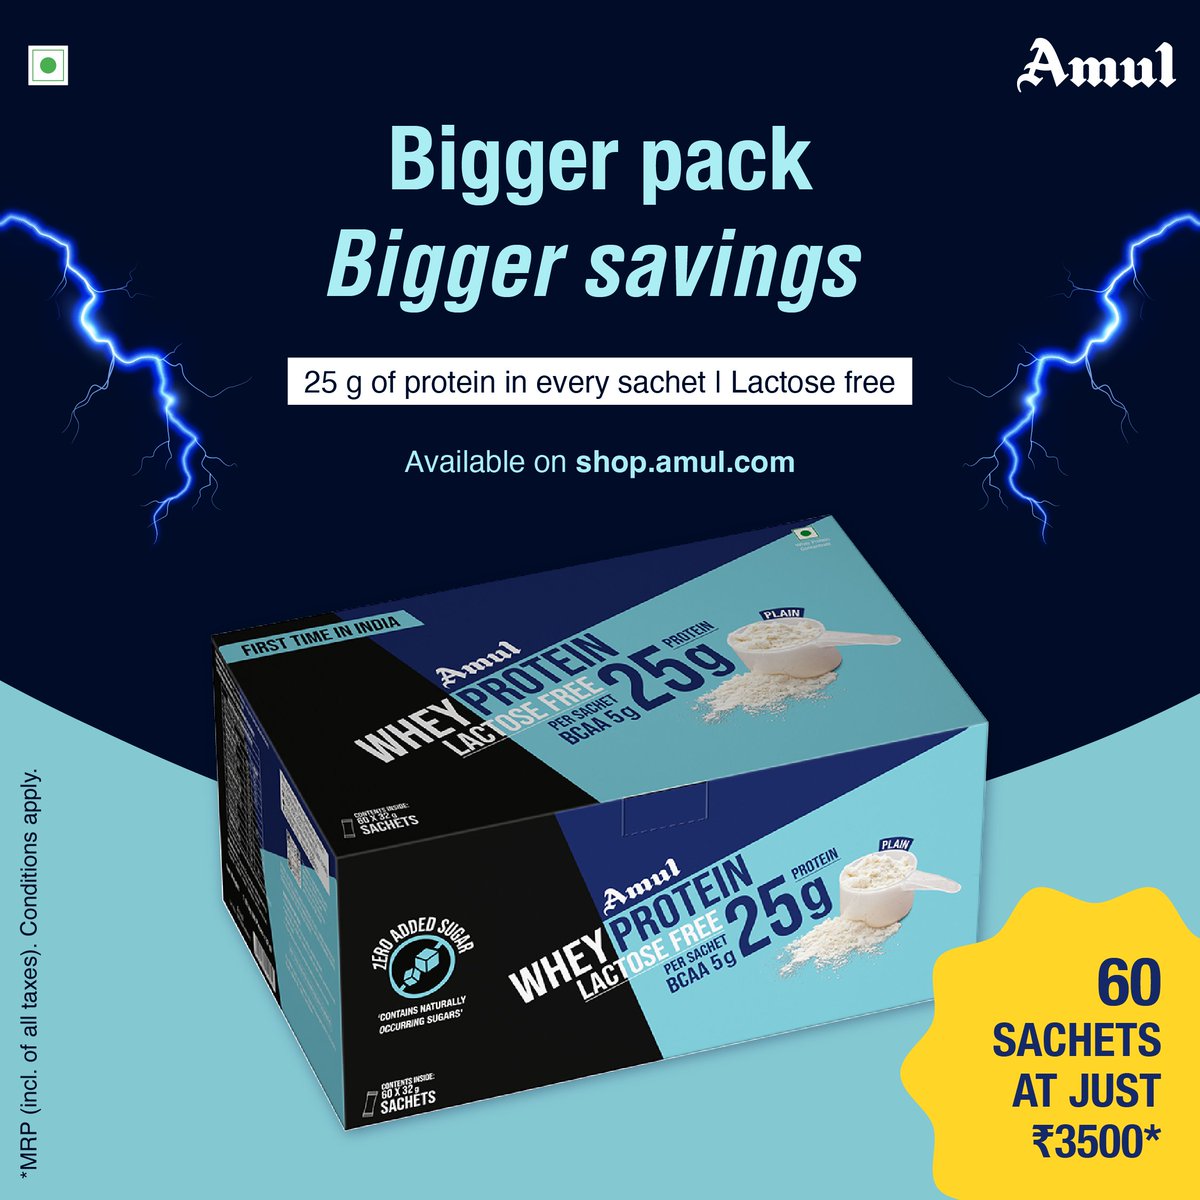 Bigger pack, bigger savings! 
Now your favourite Amul lactose free plain whey is available in a pack of 60 at just ₹3500* only. Stock up, save, and stay fuelled for longer!
Available on shop.amul.com
#WPC60 #MoreNutrition #MoreSavings #Amul #WheyProtein #Lactosefree